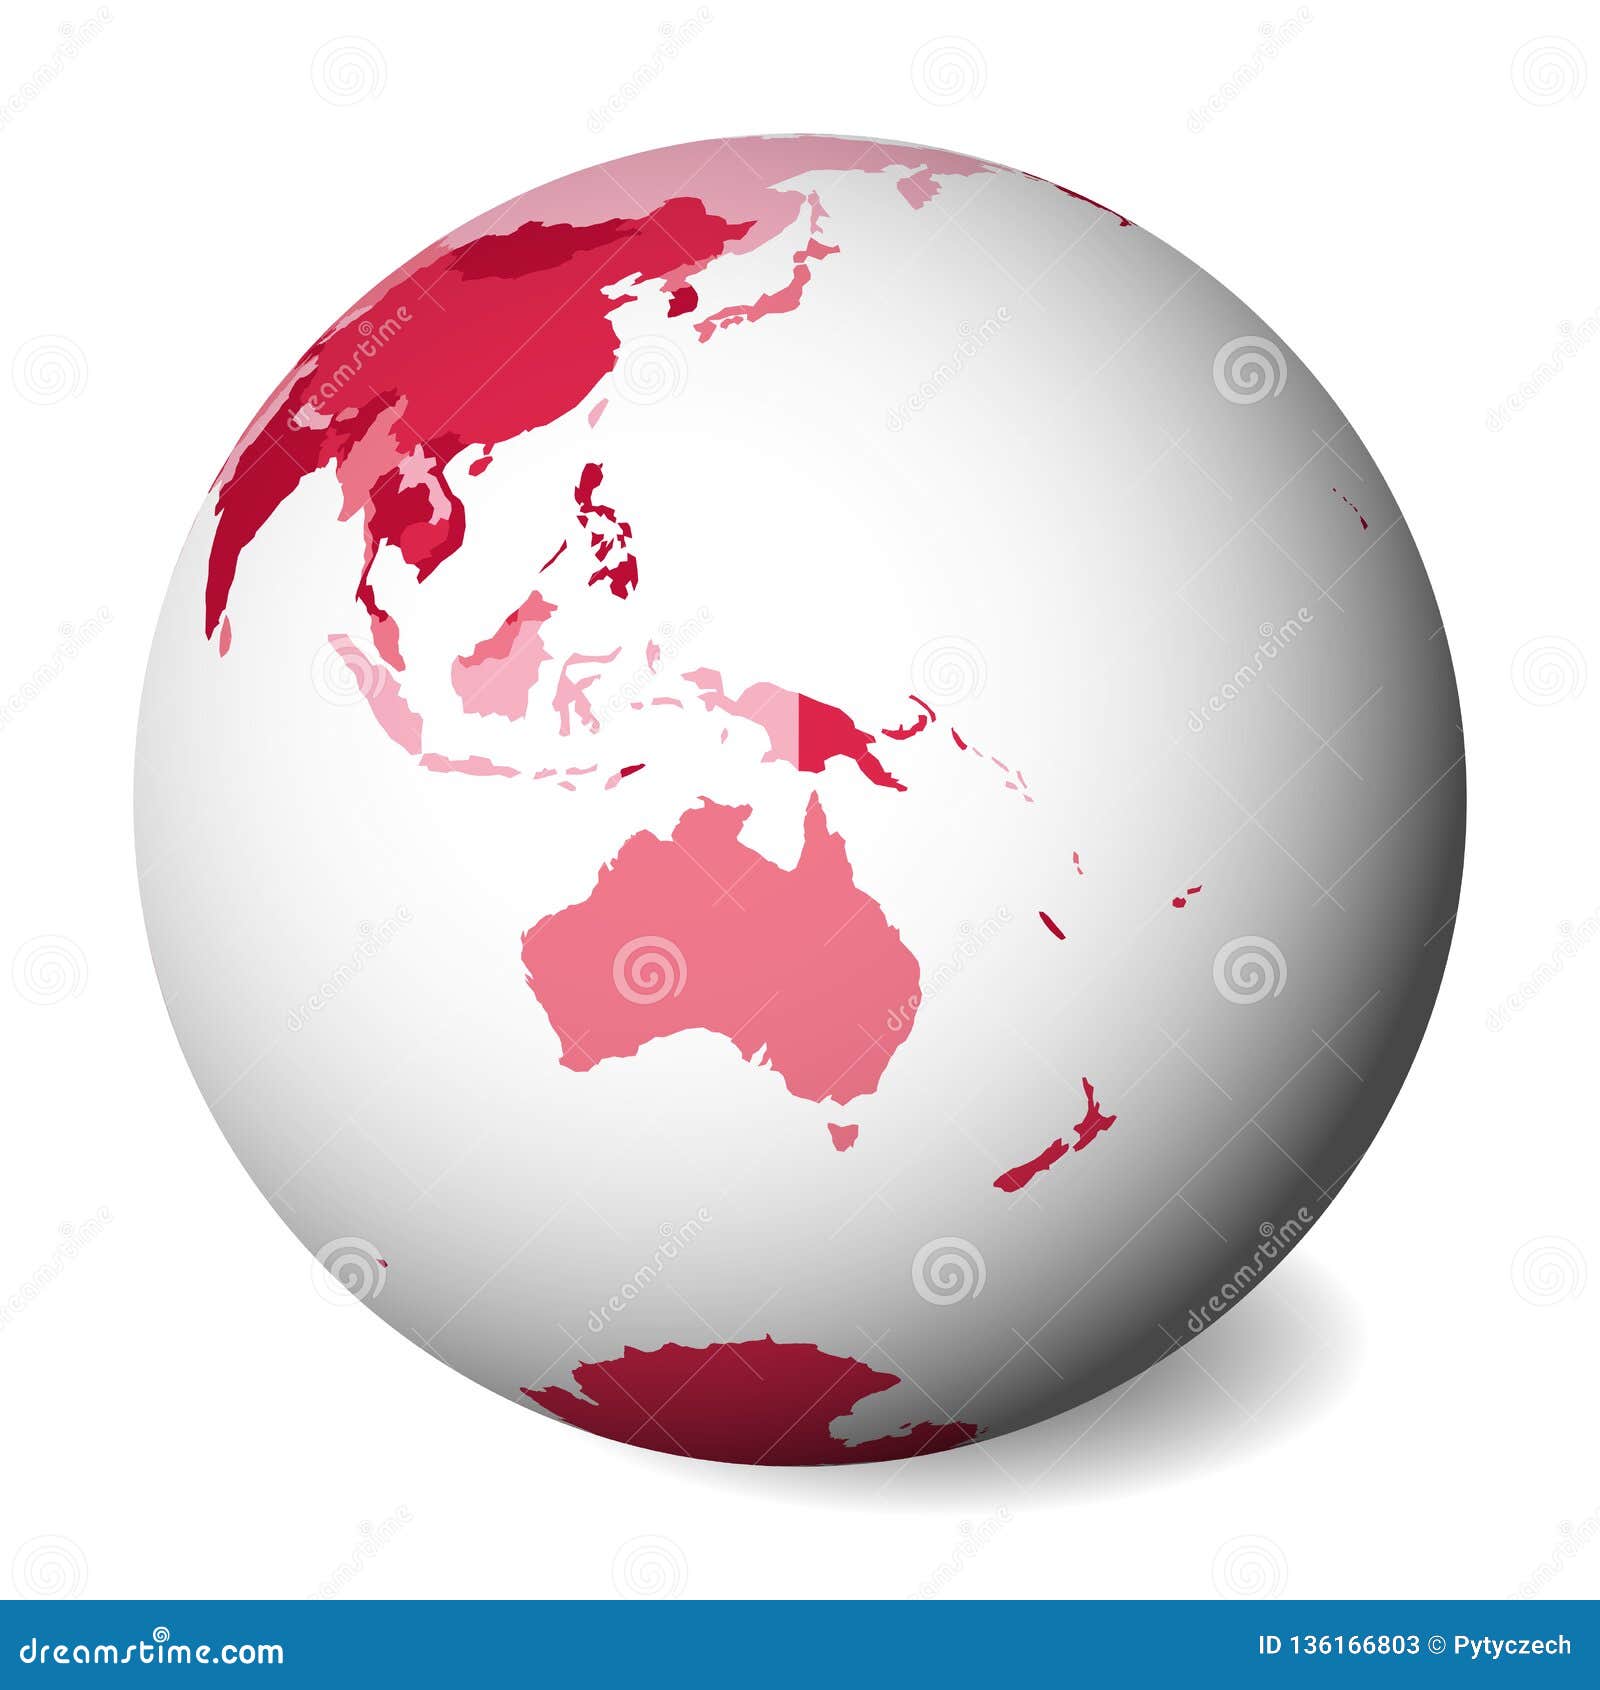 Blank Political Map Of Australia 3d Earth Globe With Pink Map Vector